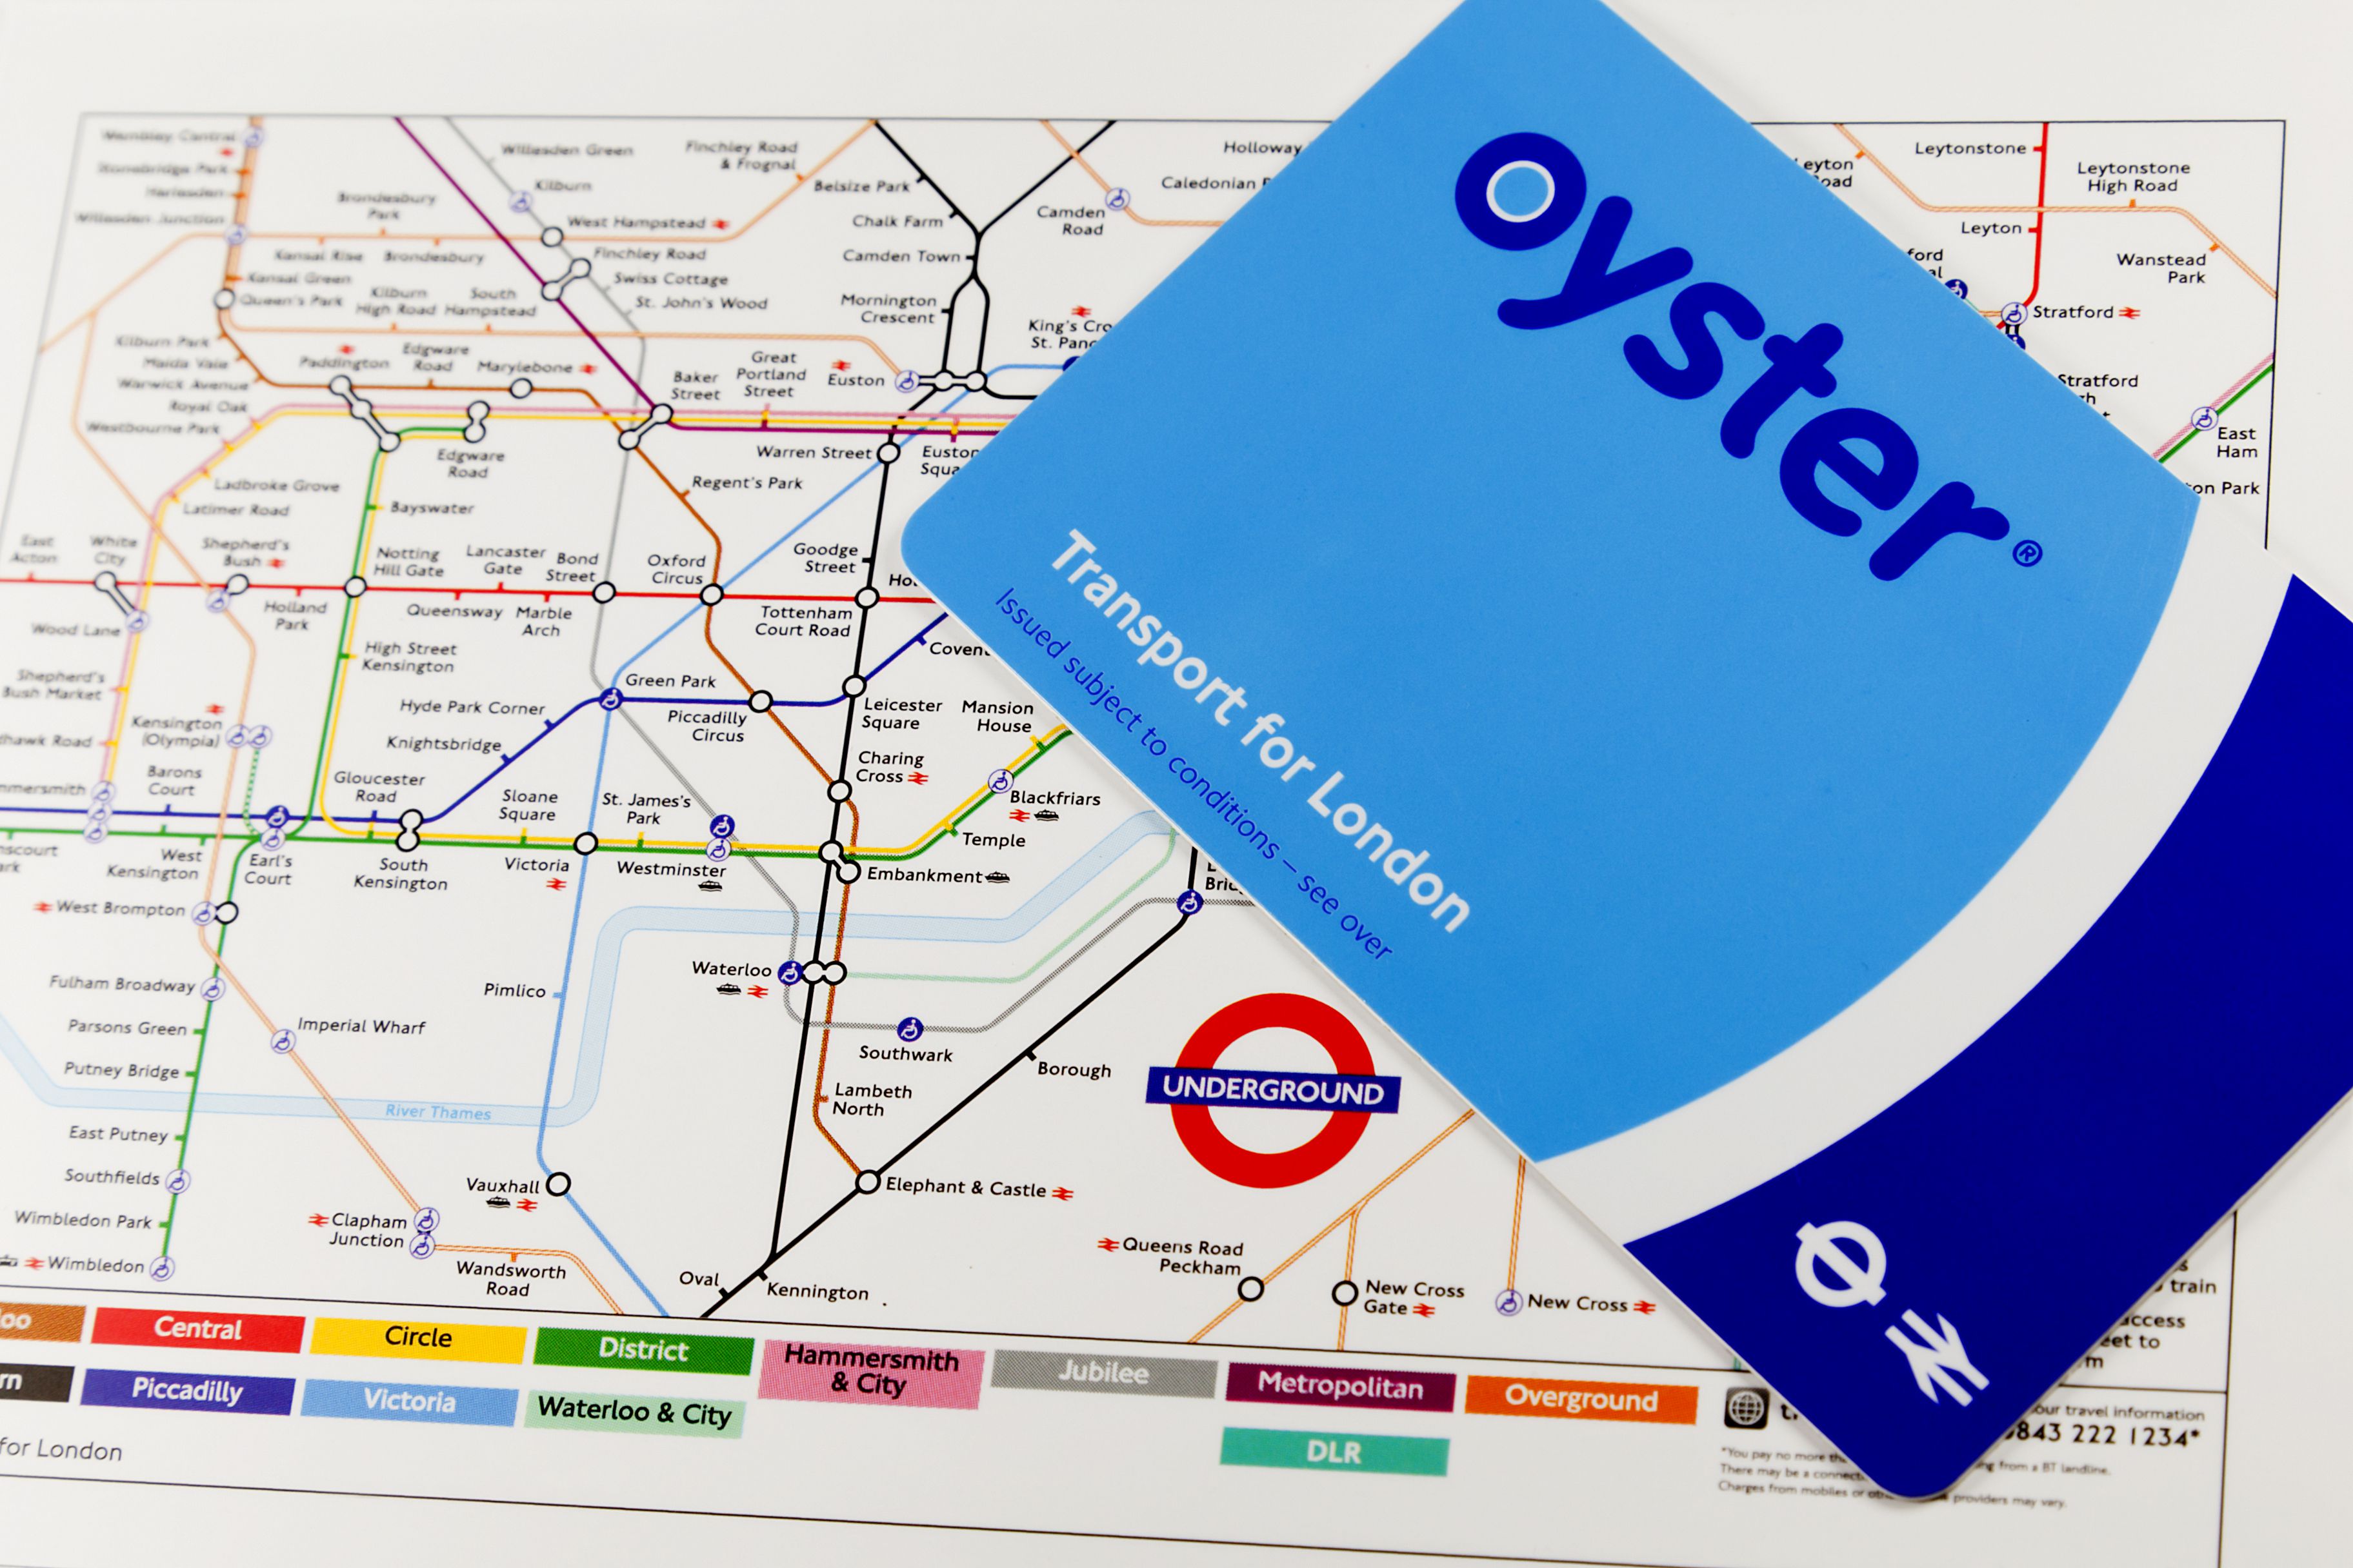 travel card and oyster